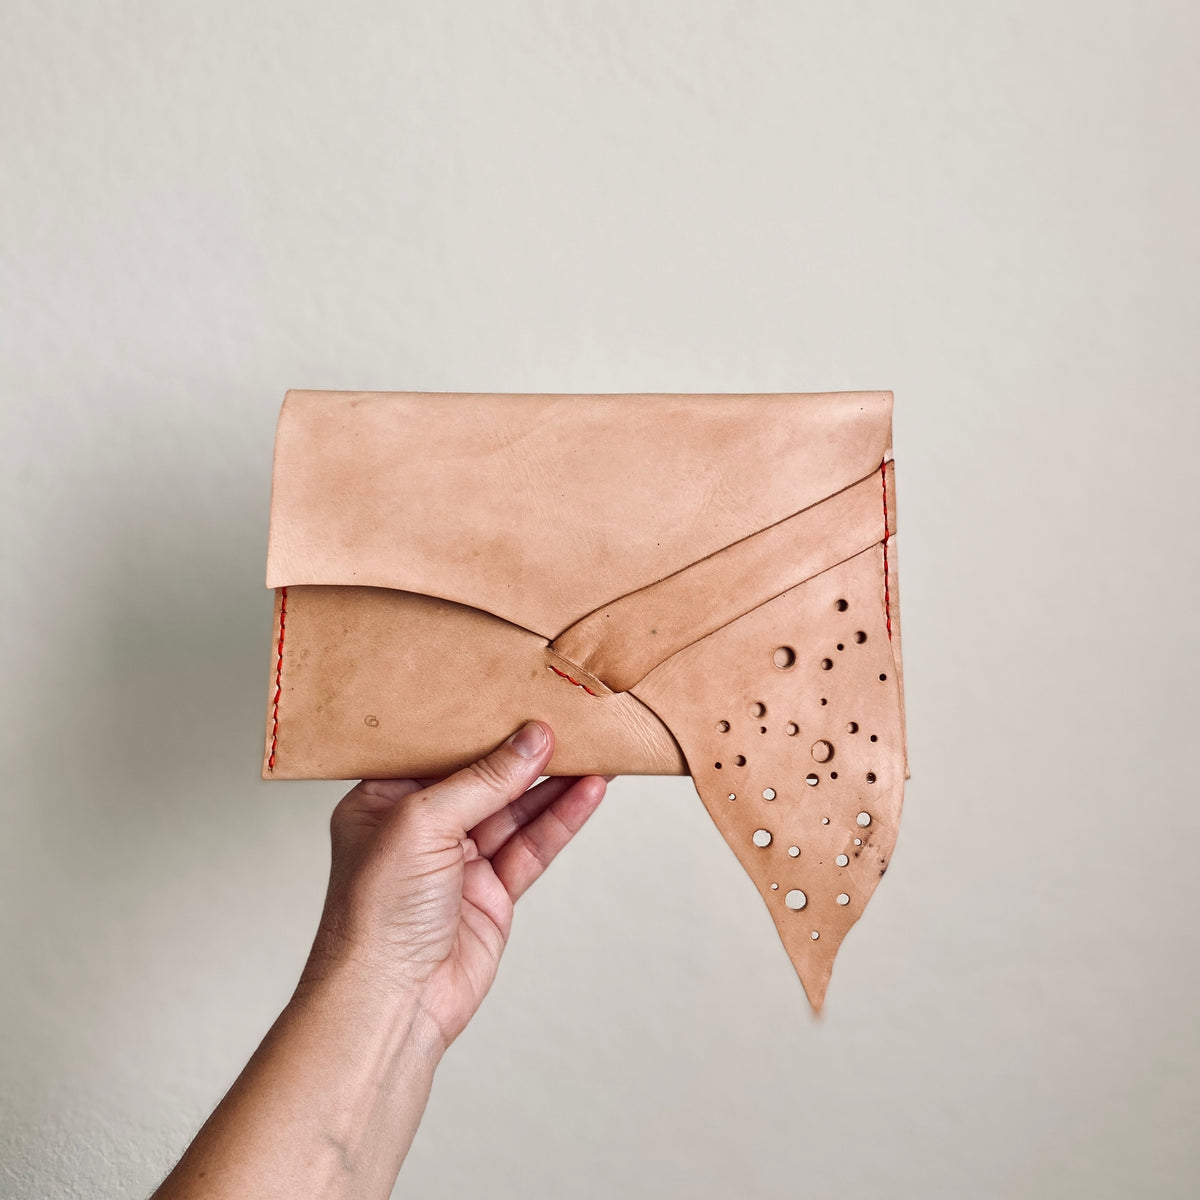 Handsewn Leather clutch with asymetrical flap that tucks under a leather strap to close and is stitched in contrasting color held by a white hand model